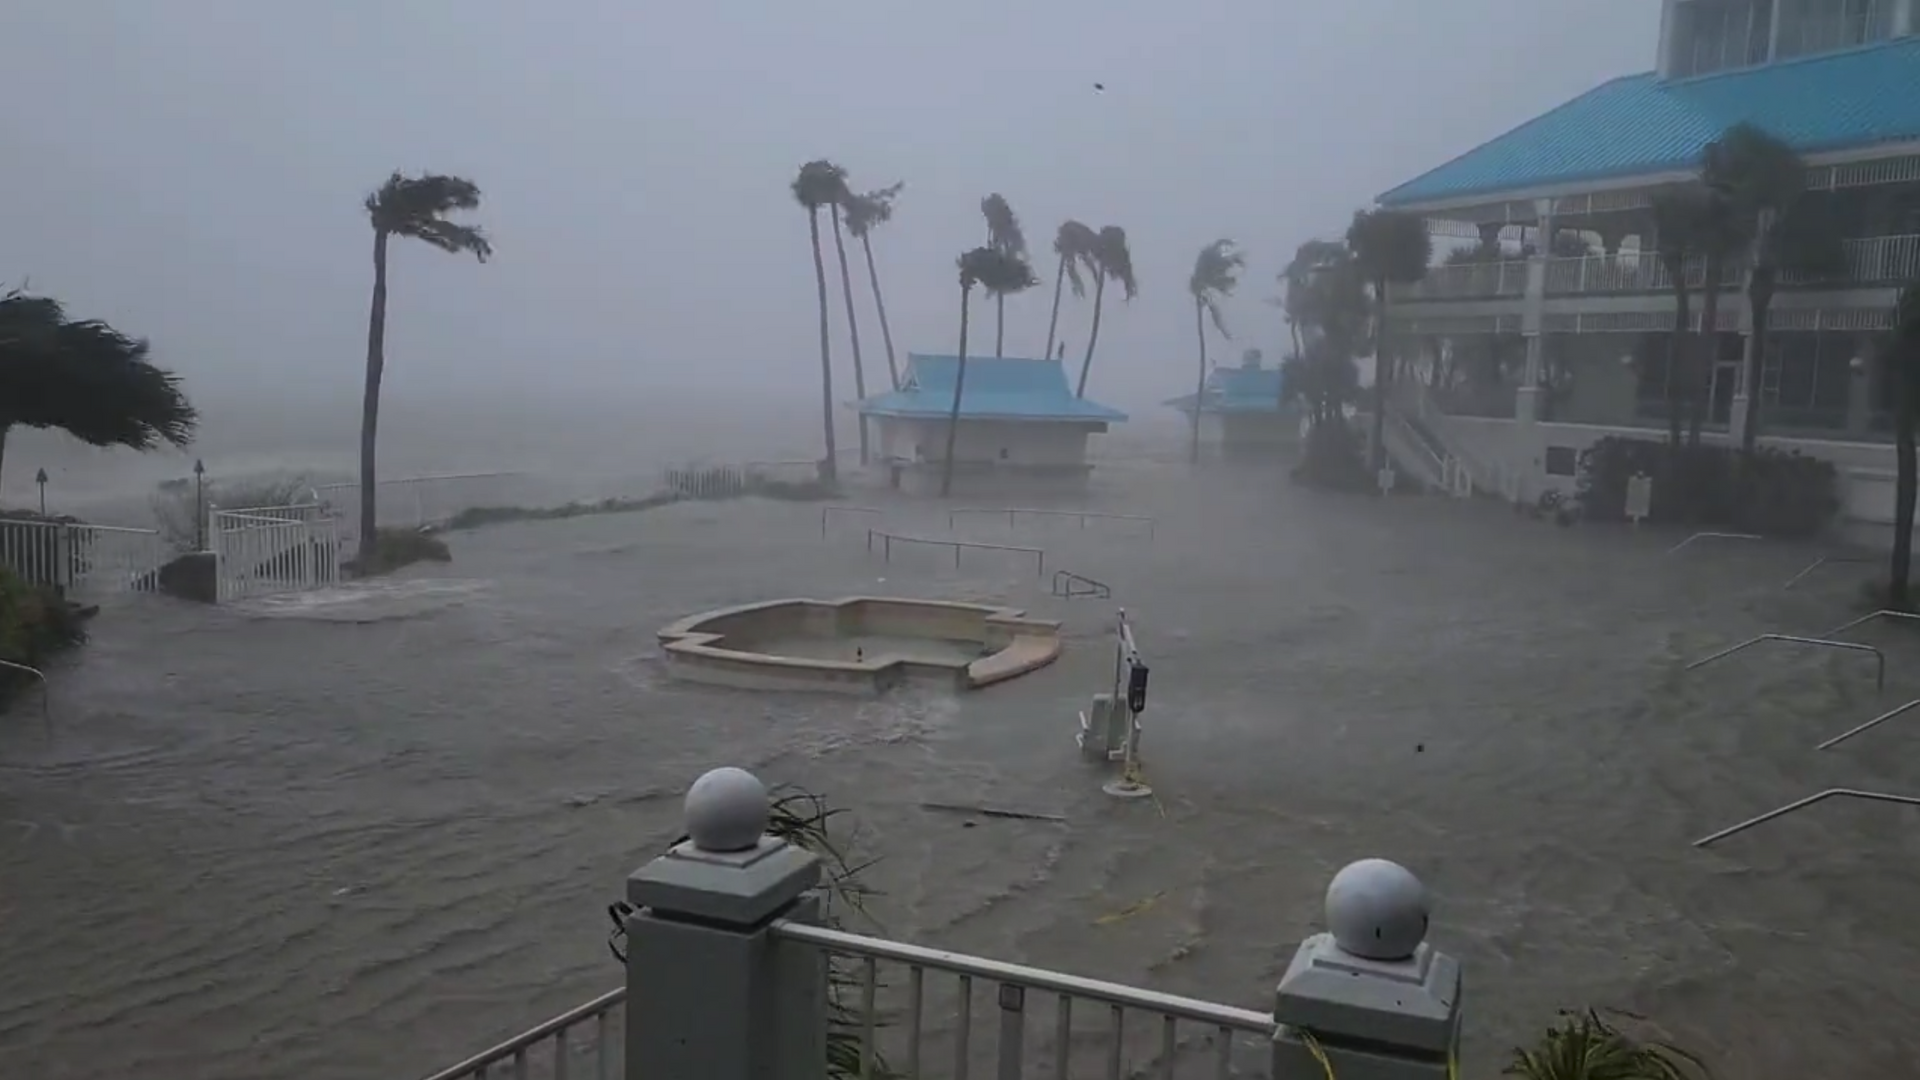 Hurricane Ian has officially made landfall in Florida as a Category 4 storm, the US National Hurricane Center has confirmed. - Sputnik International, 1920, 25.12.2022